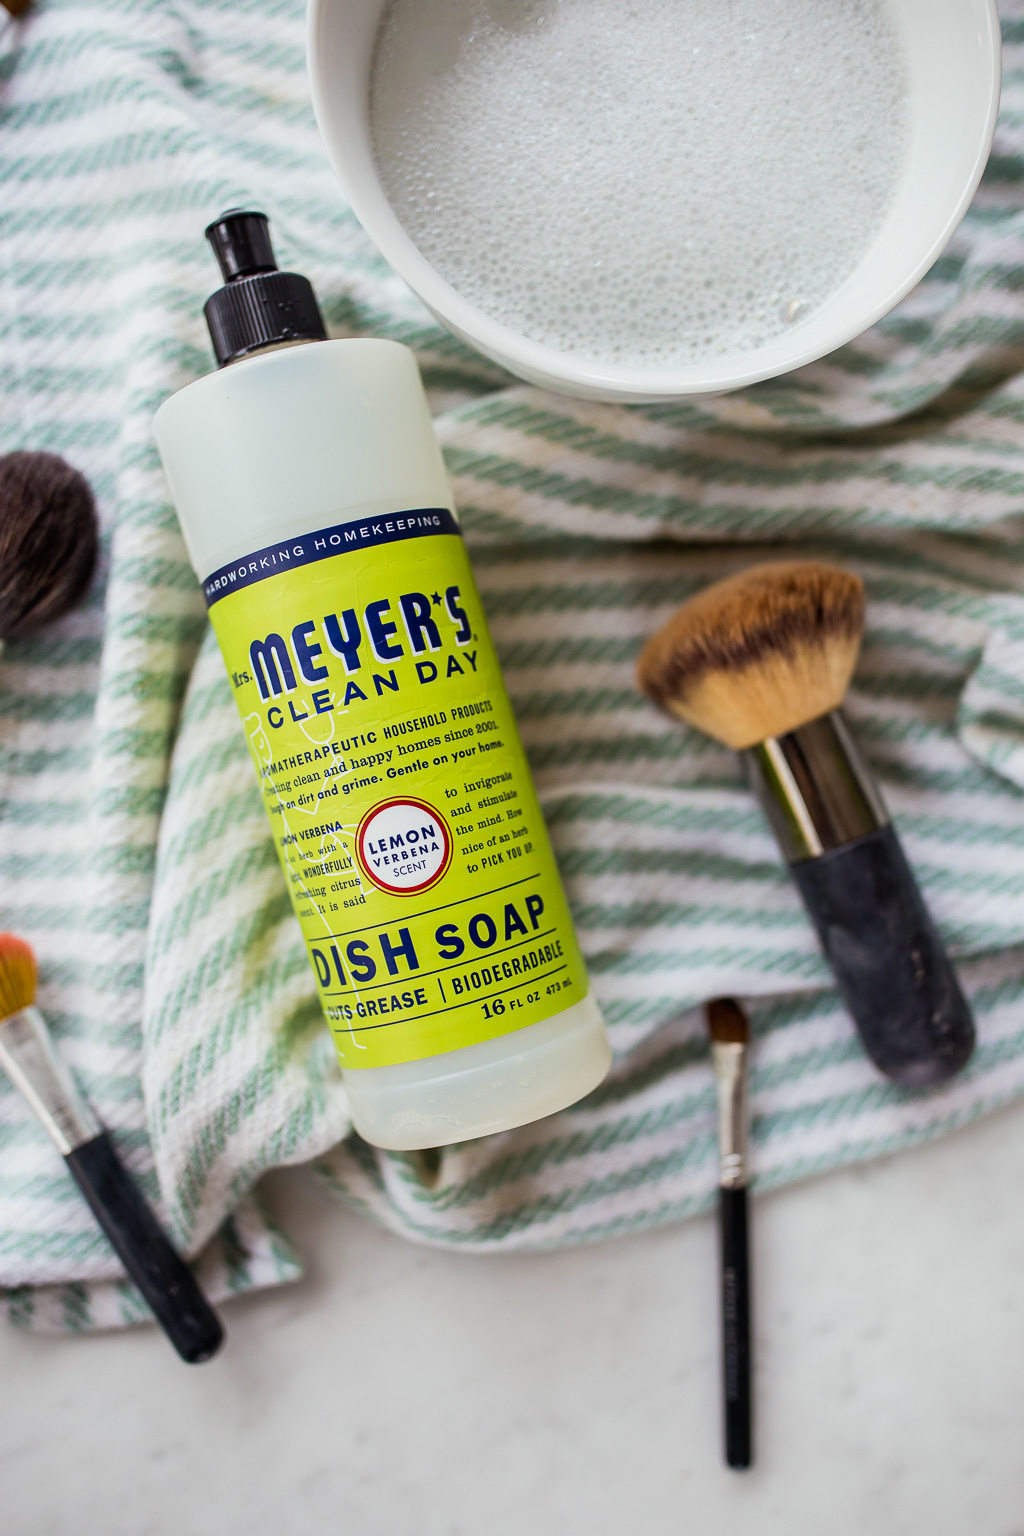 how to clean makeup brushes with Meyer's clean day